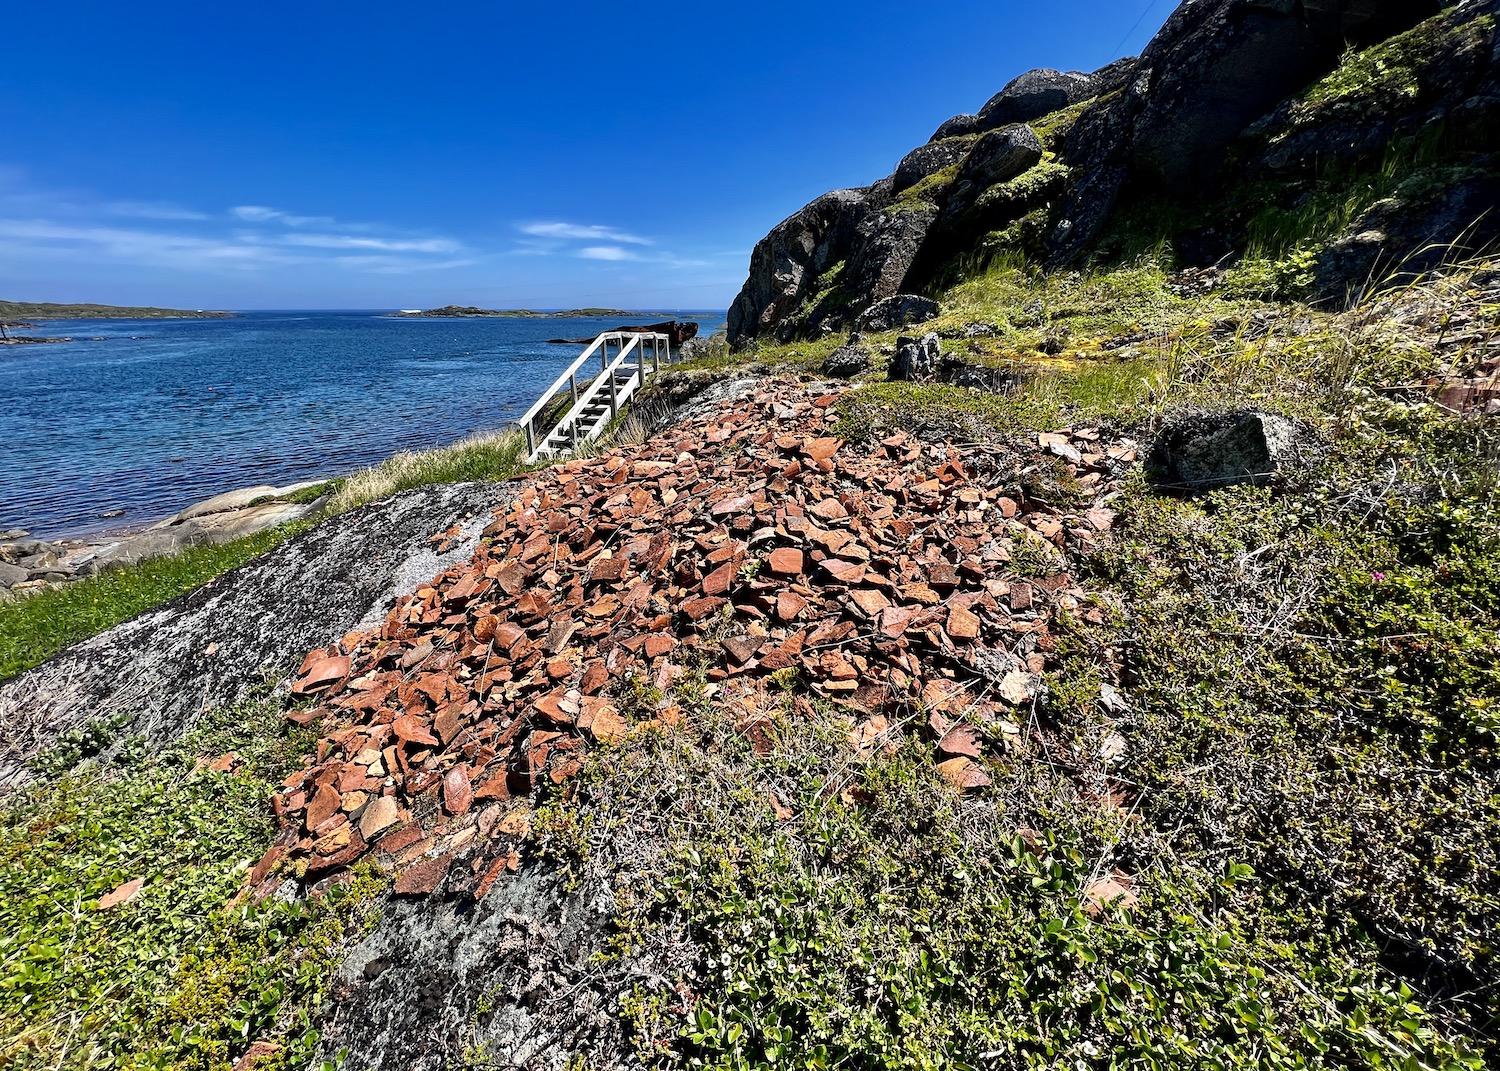 Fragments of European roofing tiles from the Basque whaling area can still be found on Saddle Island, part of the Red Bay National Historic Site.